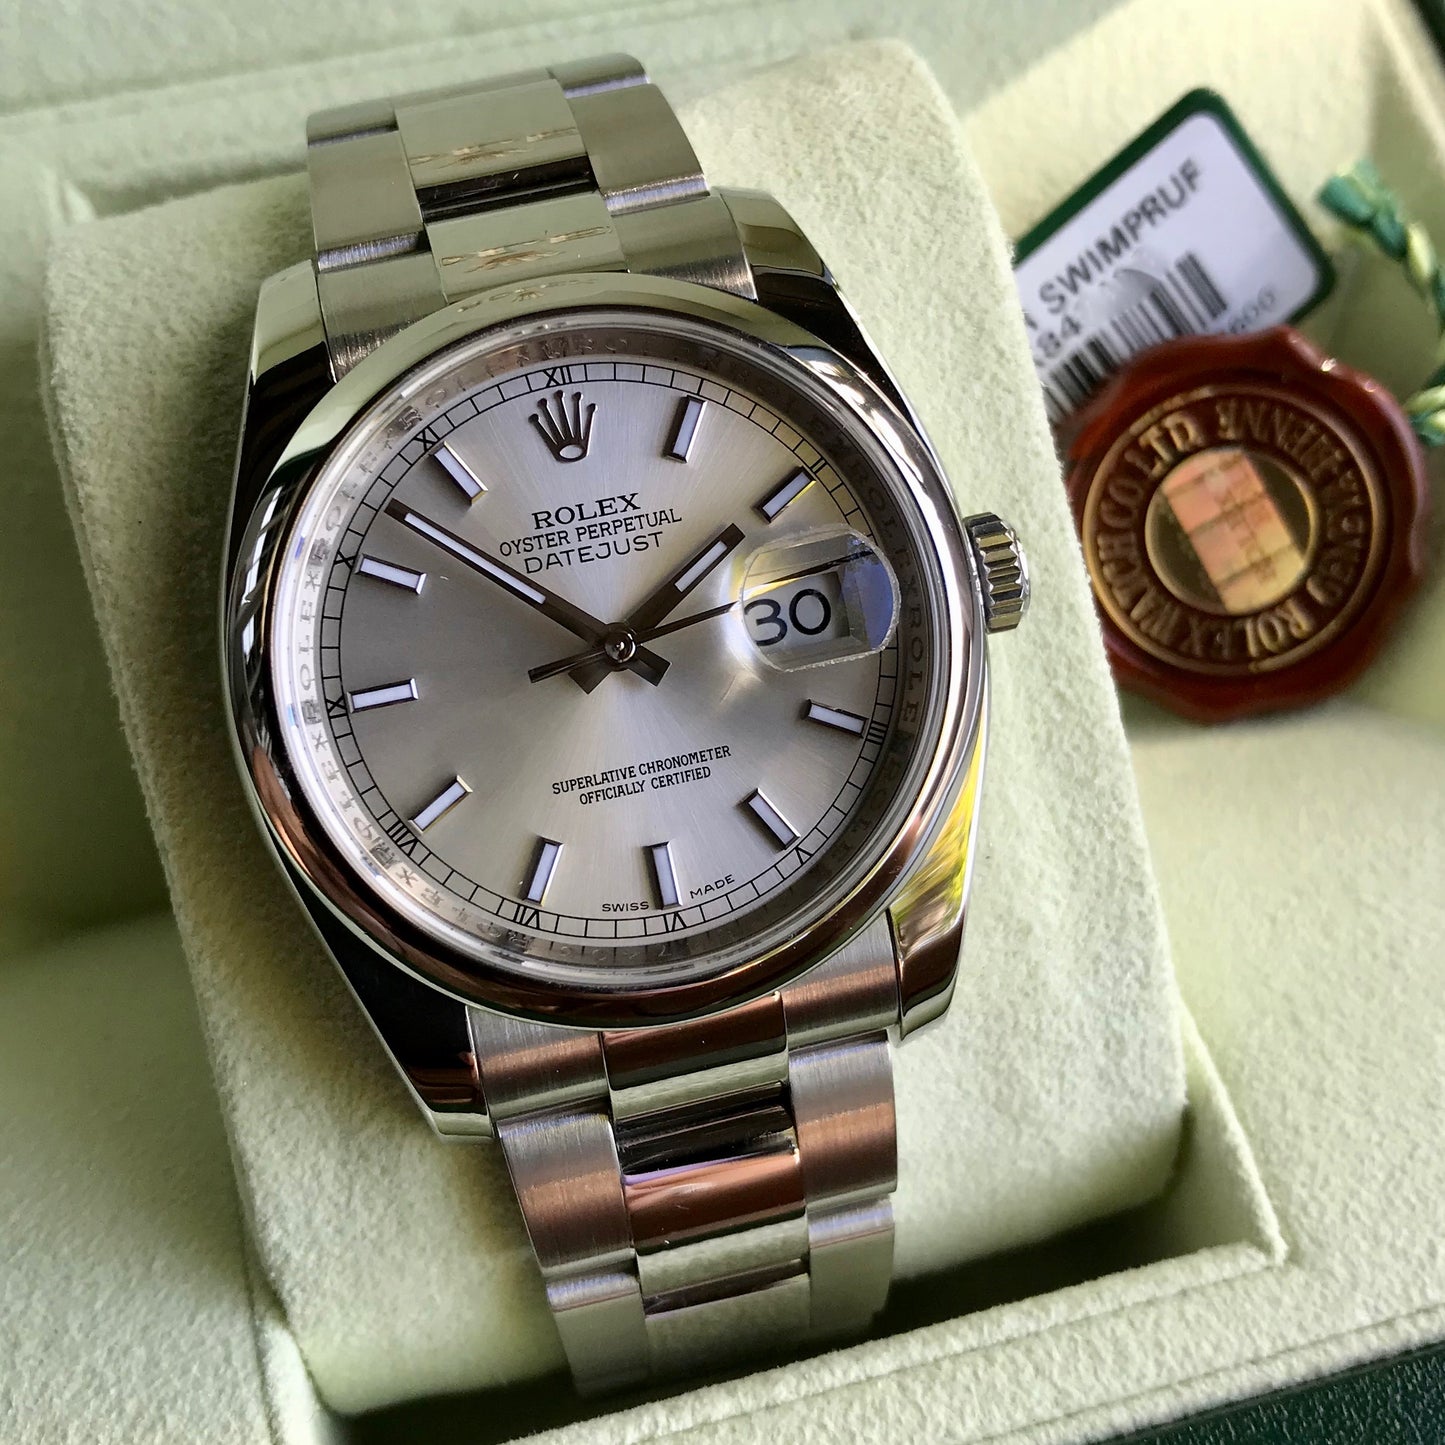 Rolex Datejust 116200 Oyster Perpetual Silver Stick Automatic Caliber 3135 Wristwatch - Hashtag Watch Company